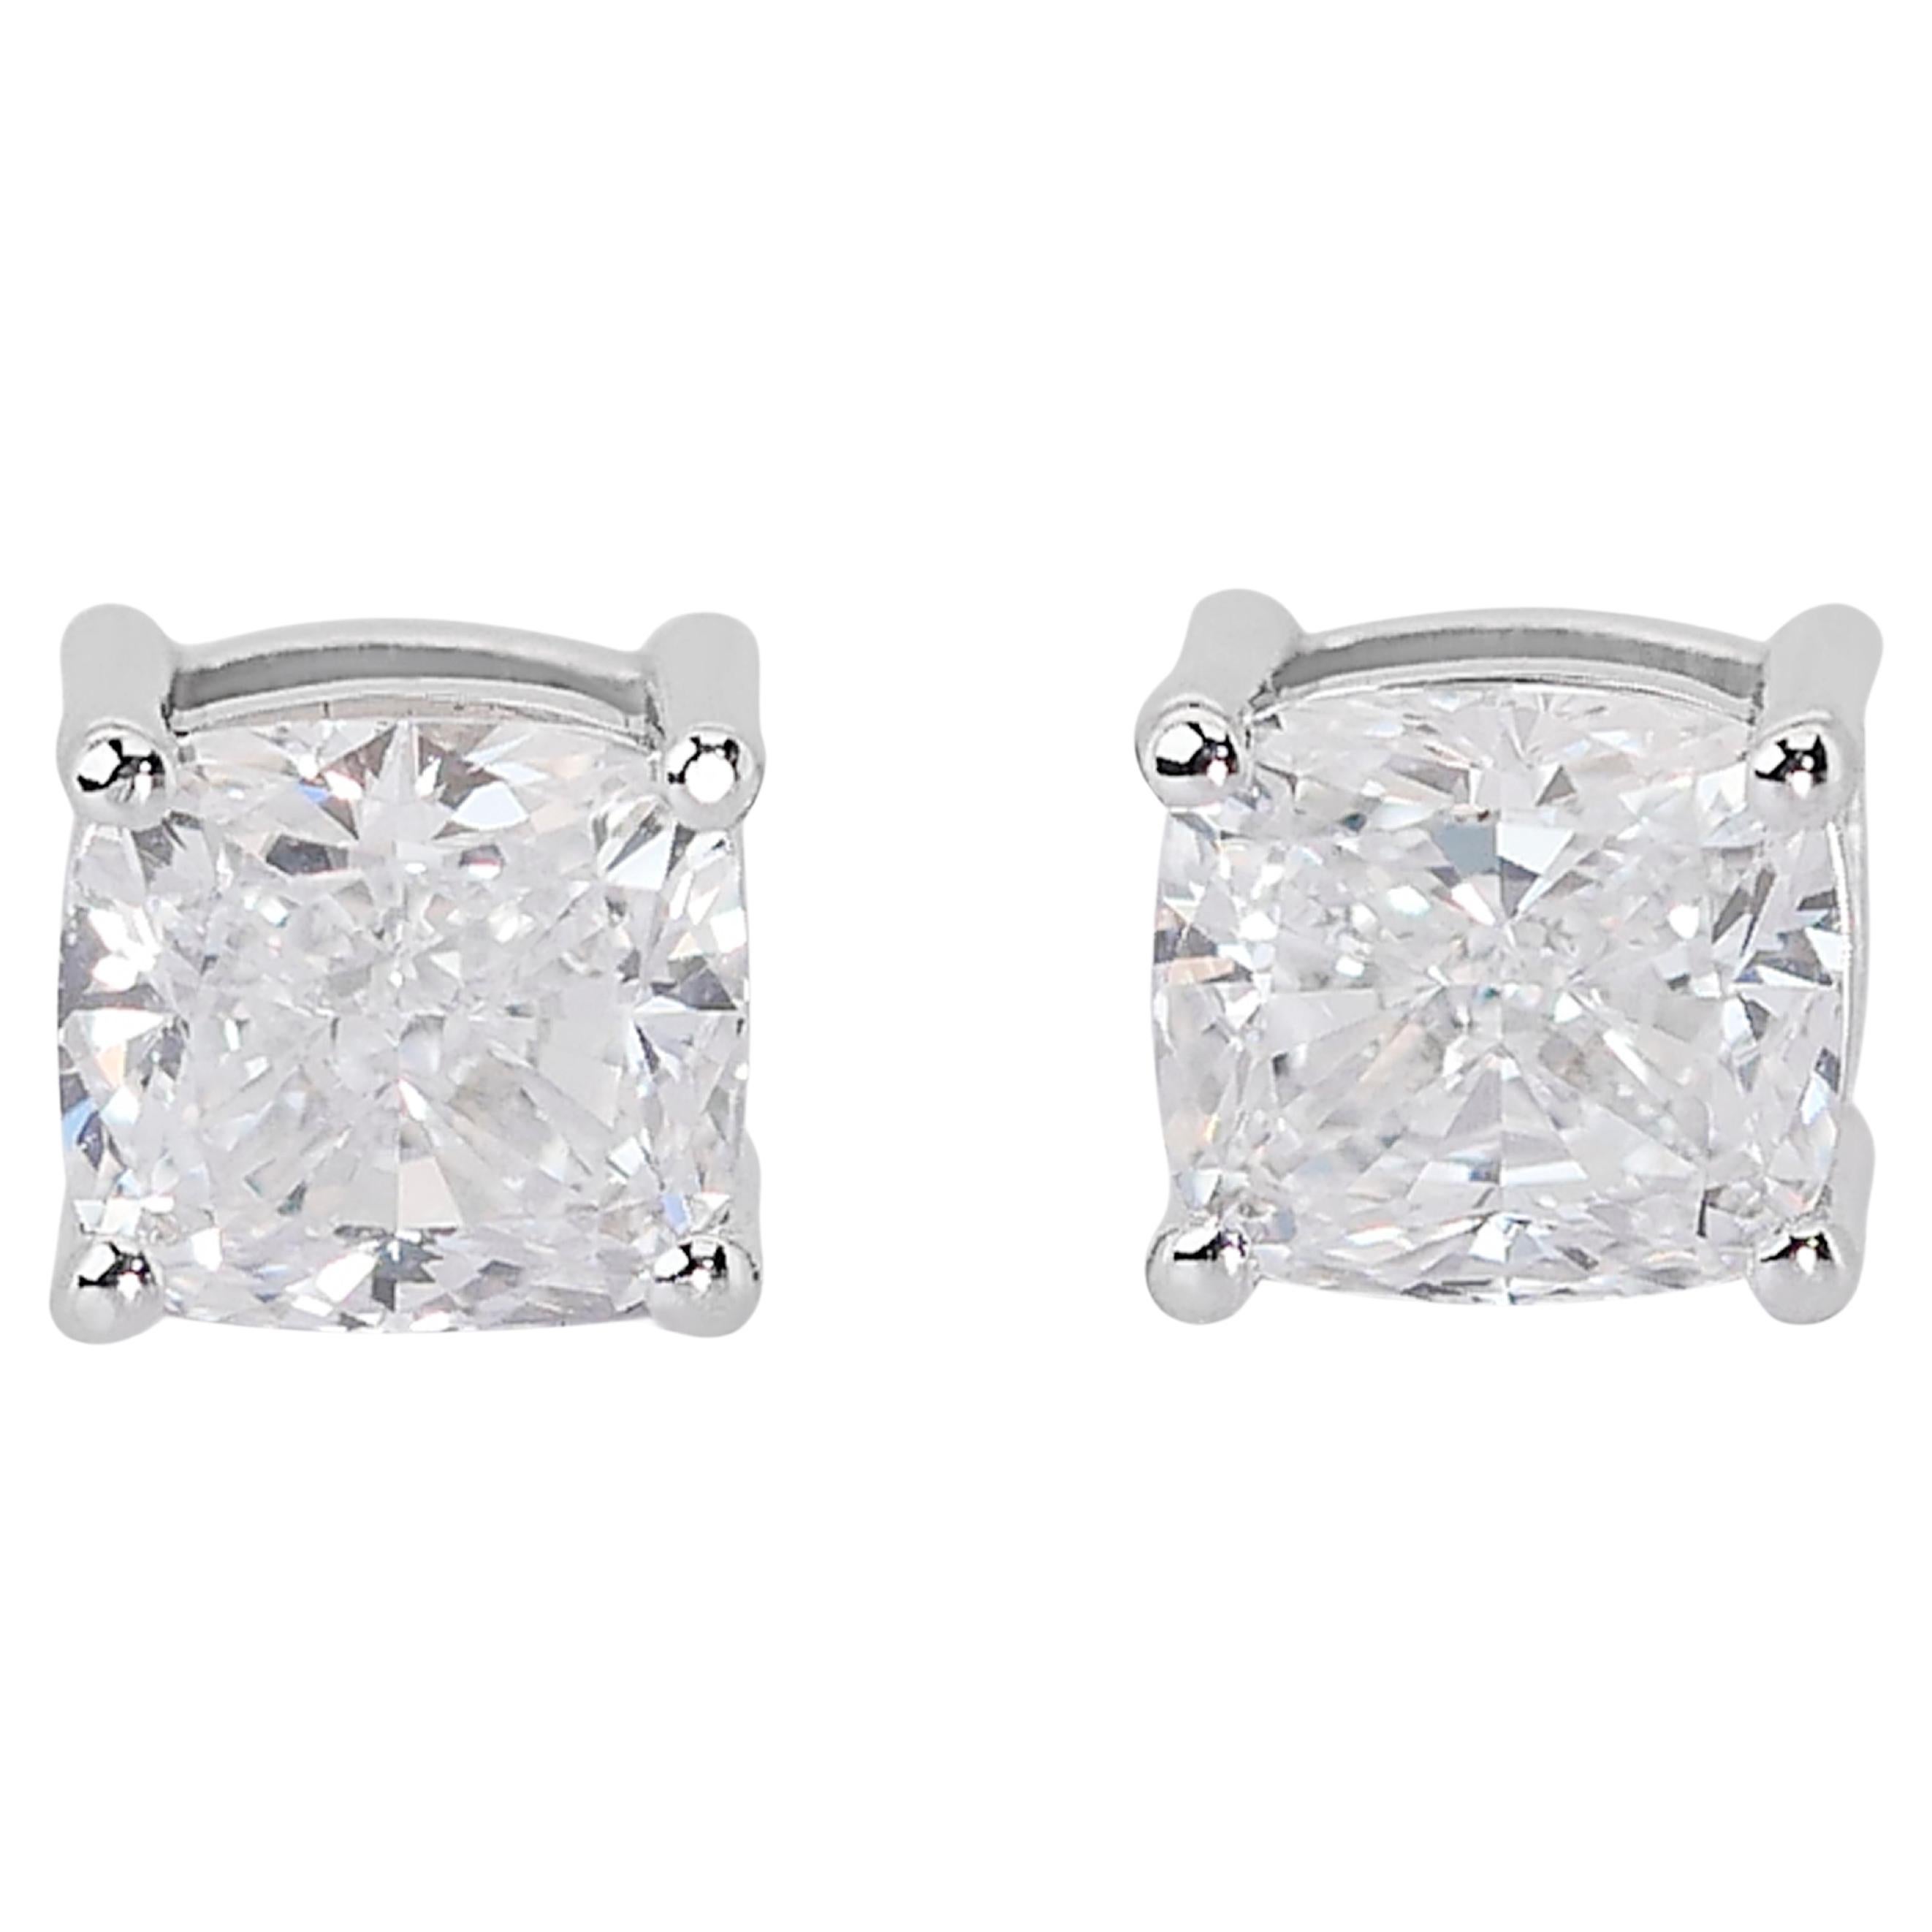 Lustrous 1.60ct Diamonds Stud Earrings in 18k White Gold - GIA Certified For Sale